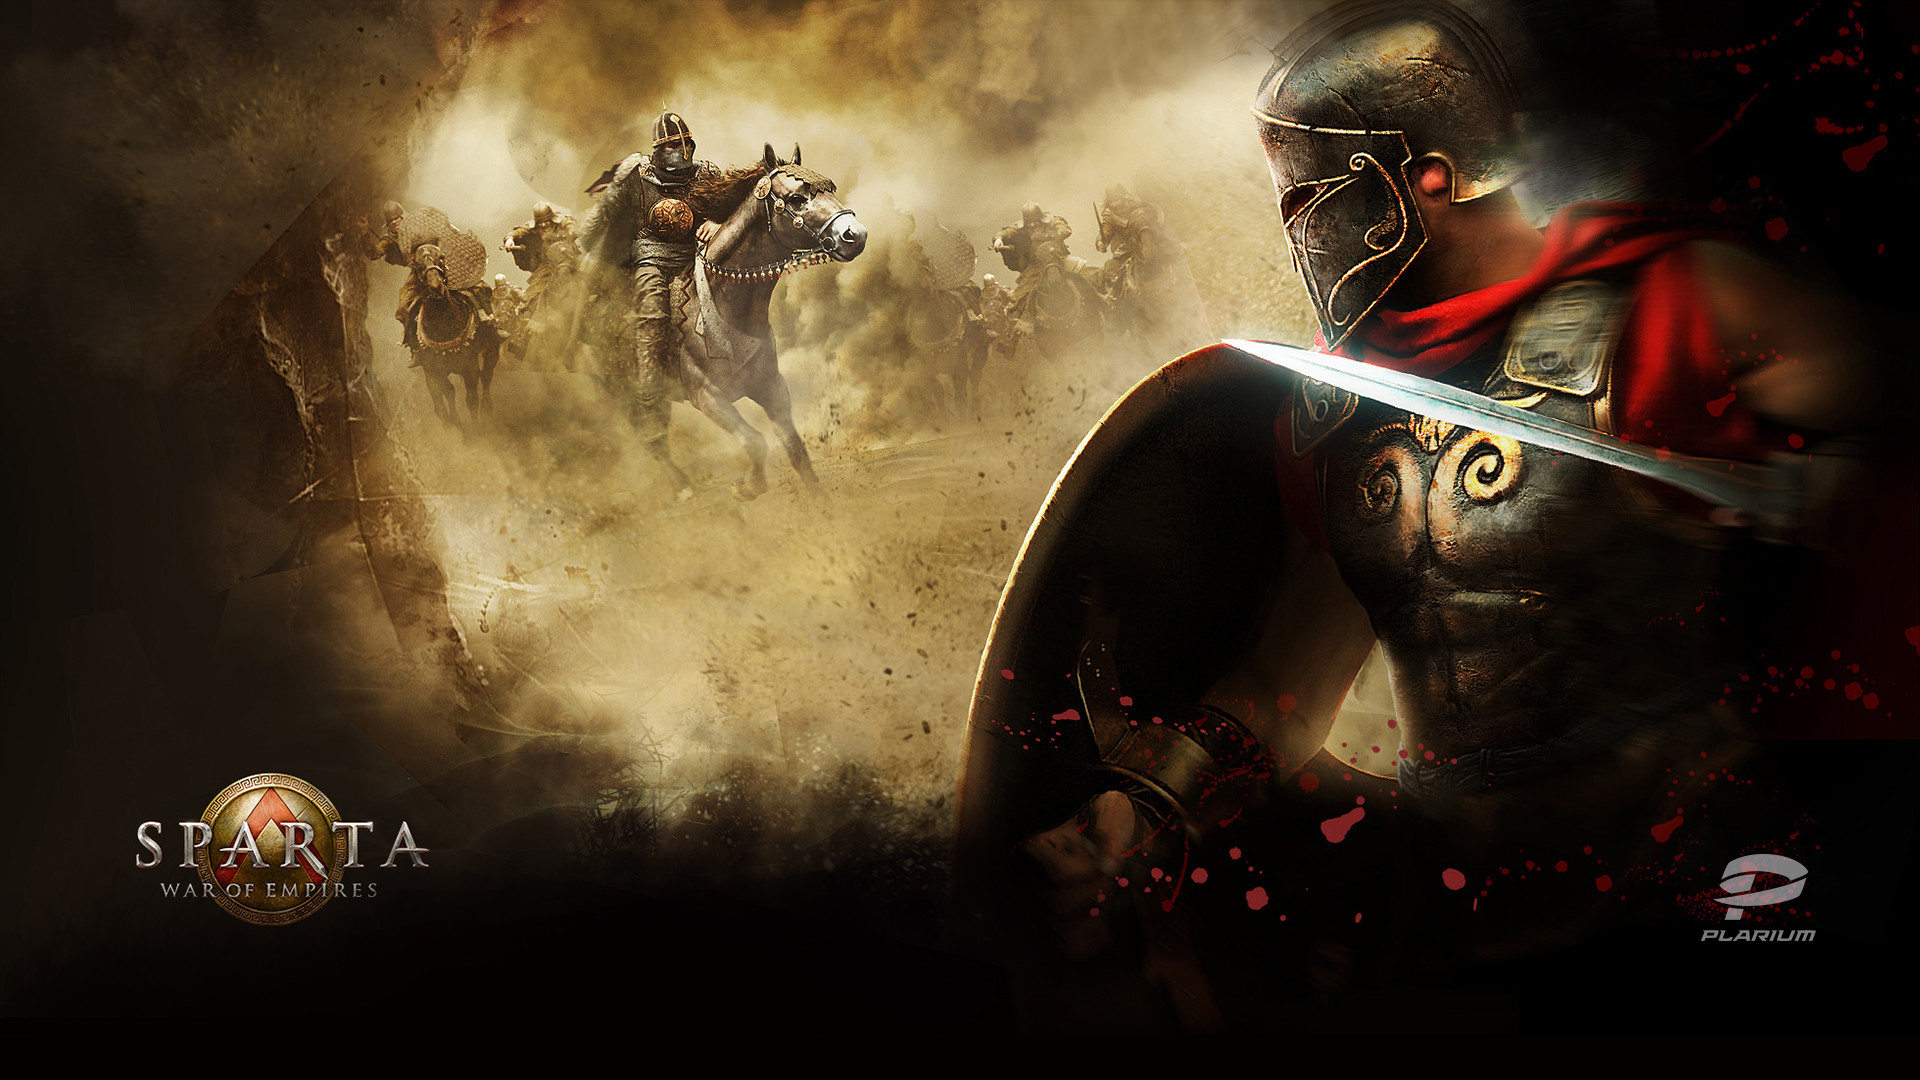 1920x1080 Tag: HDQ Spartan Wallpapers, Spartan Wallpapers, Backgrounds and Pictures  for Free, Odell